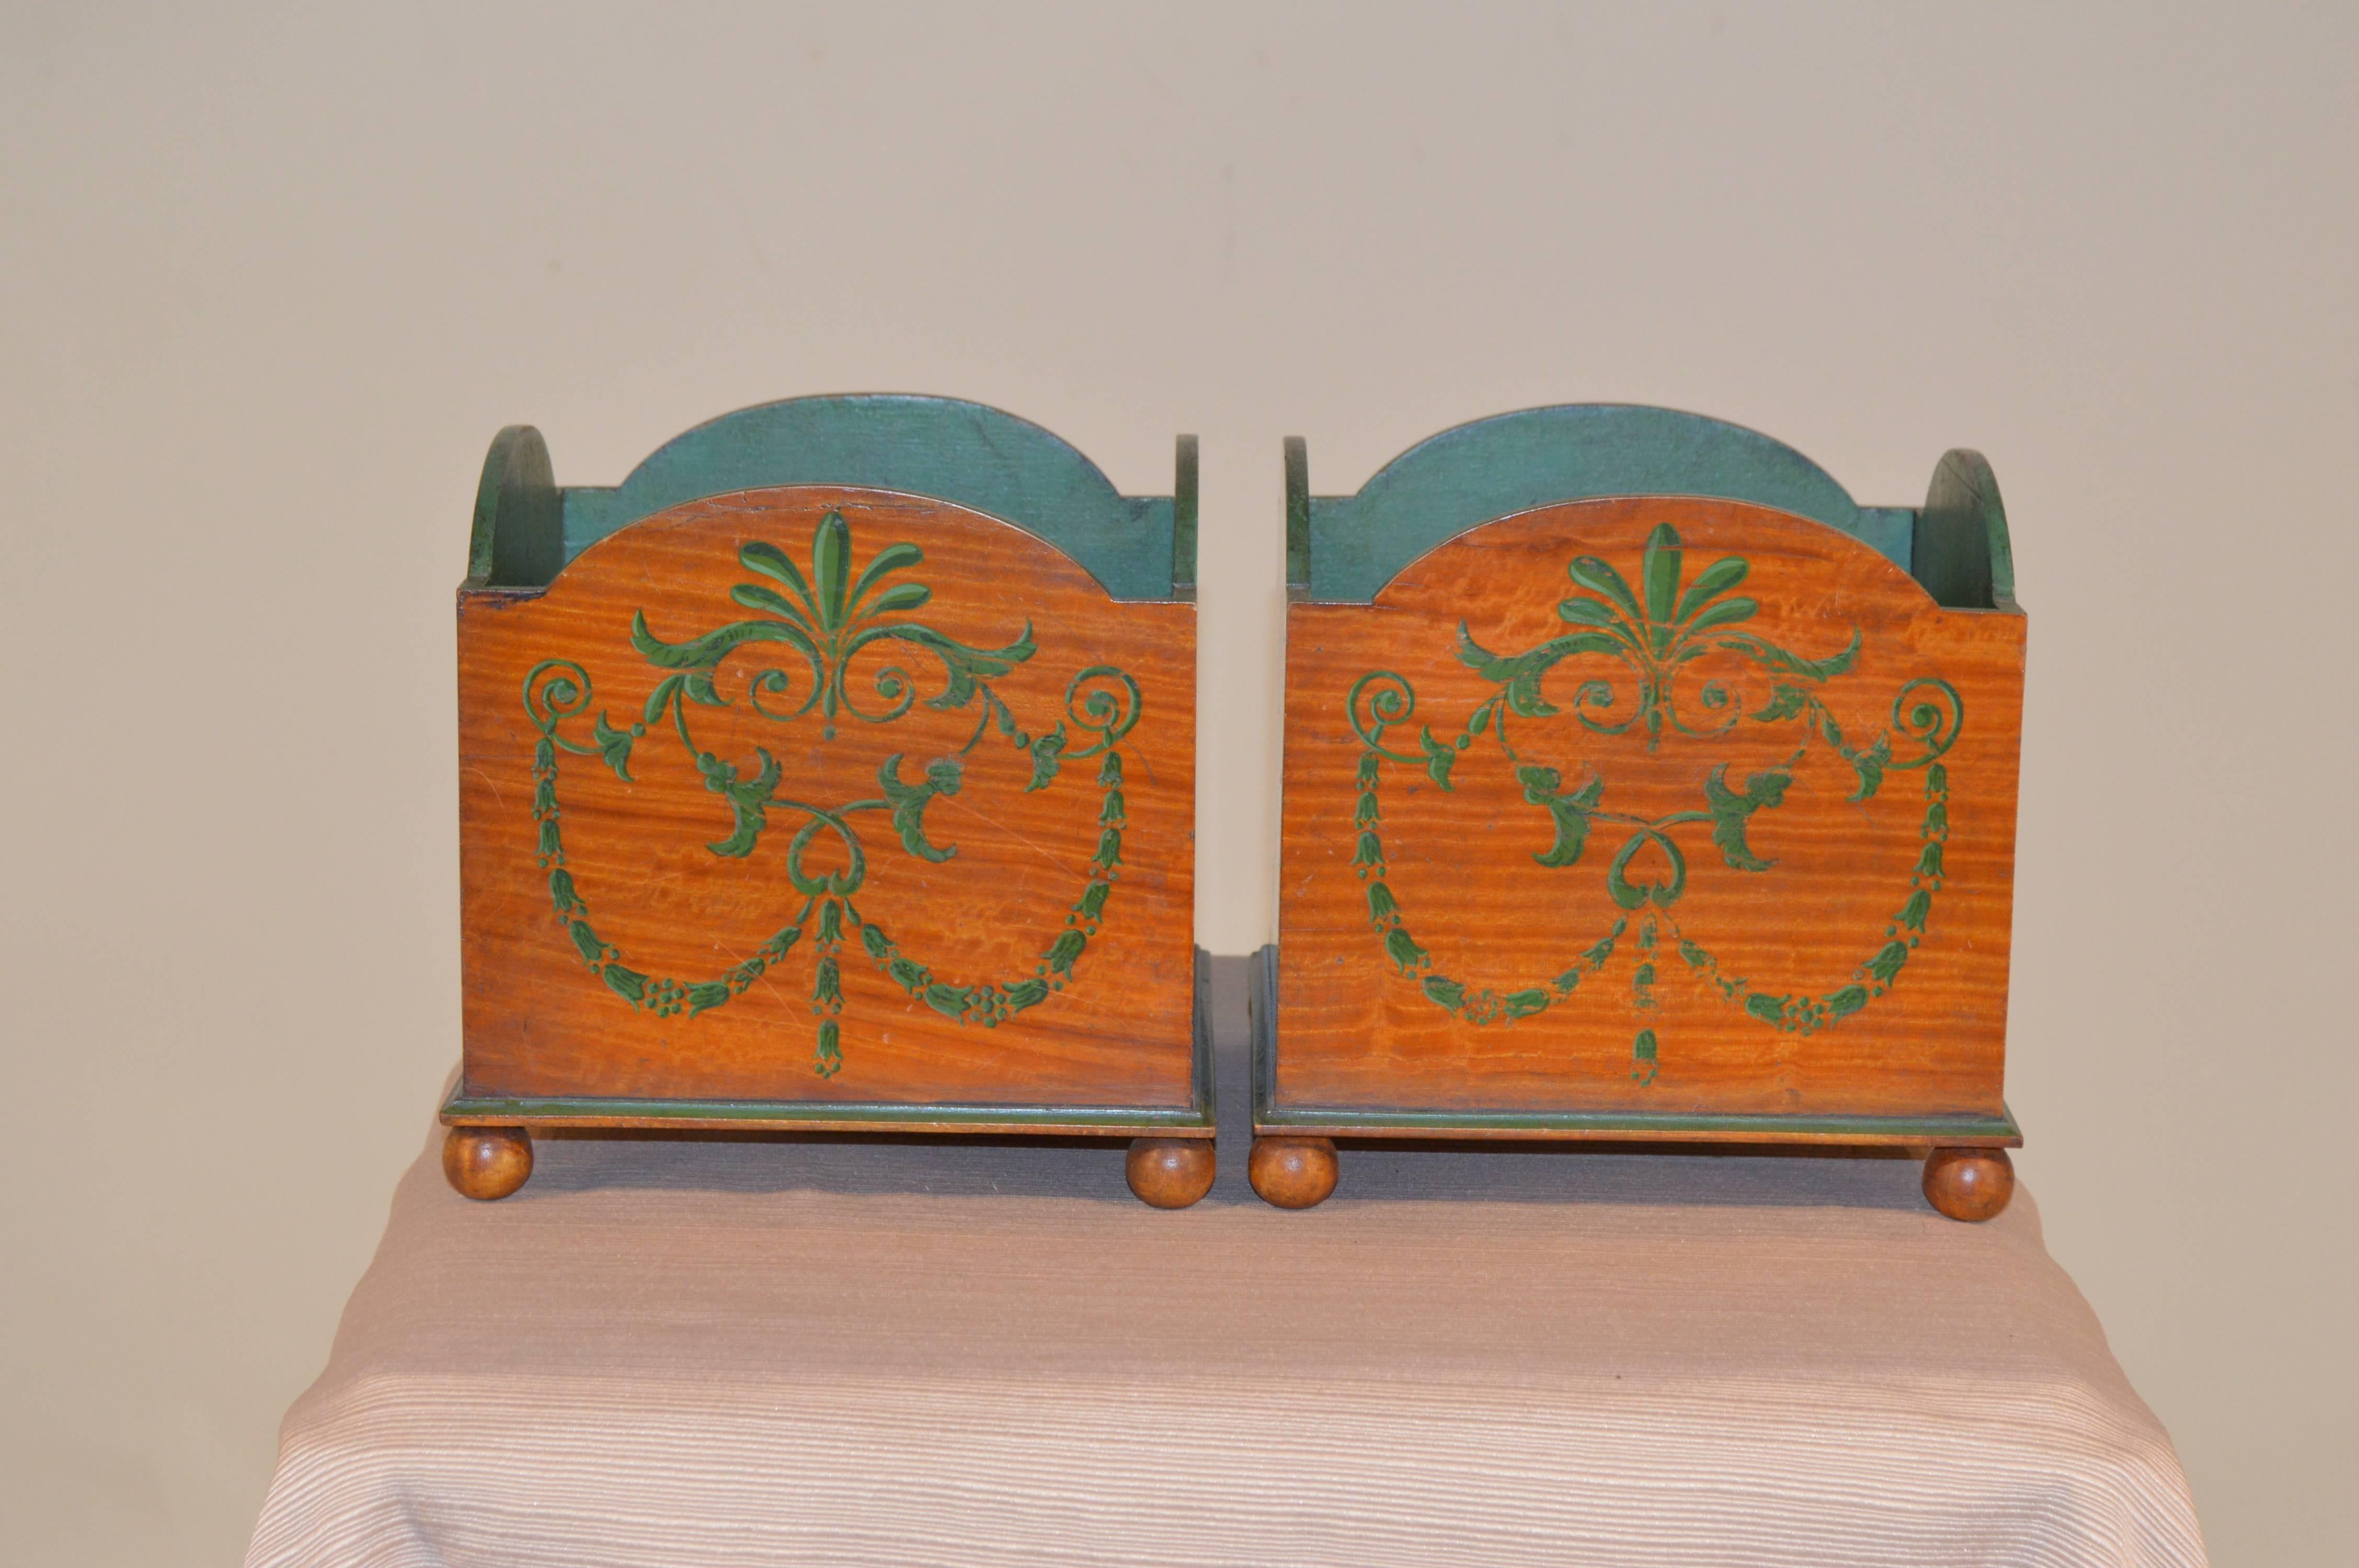 Pair of late 19th century English satinwood planters, hand-decorated with floral swags. Slight wear from use.
 